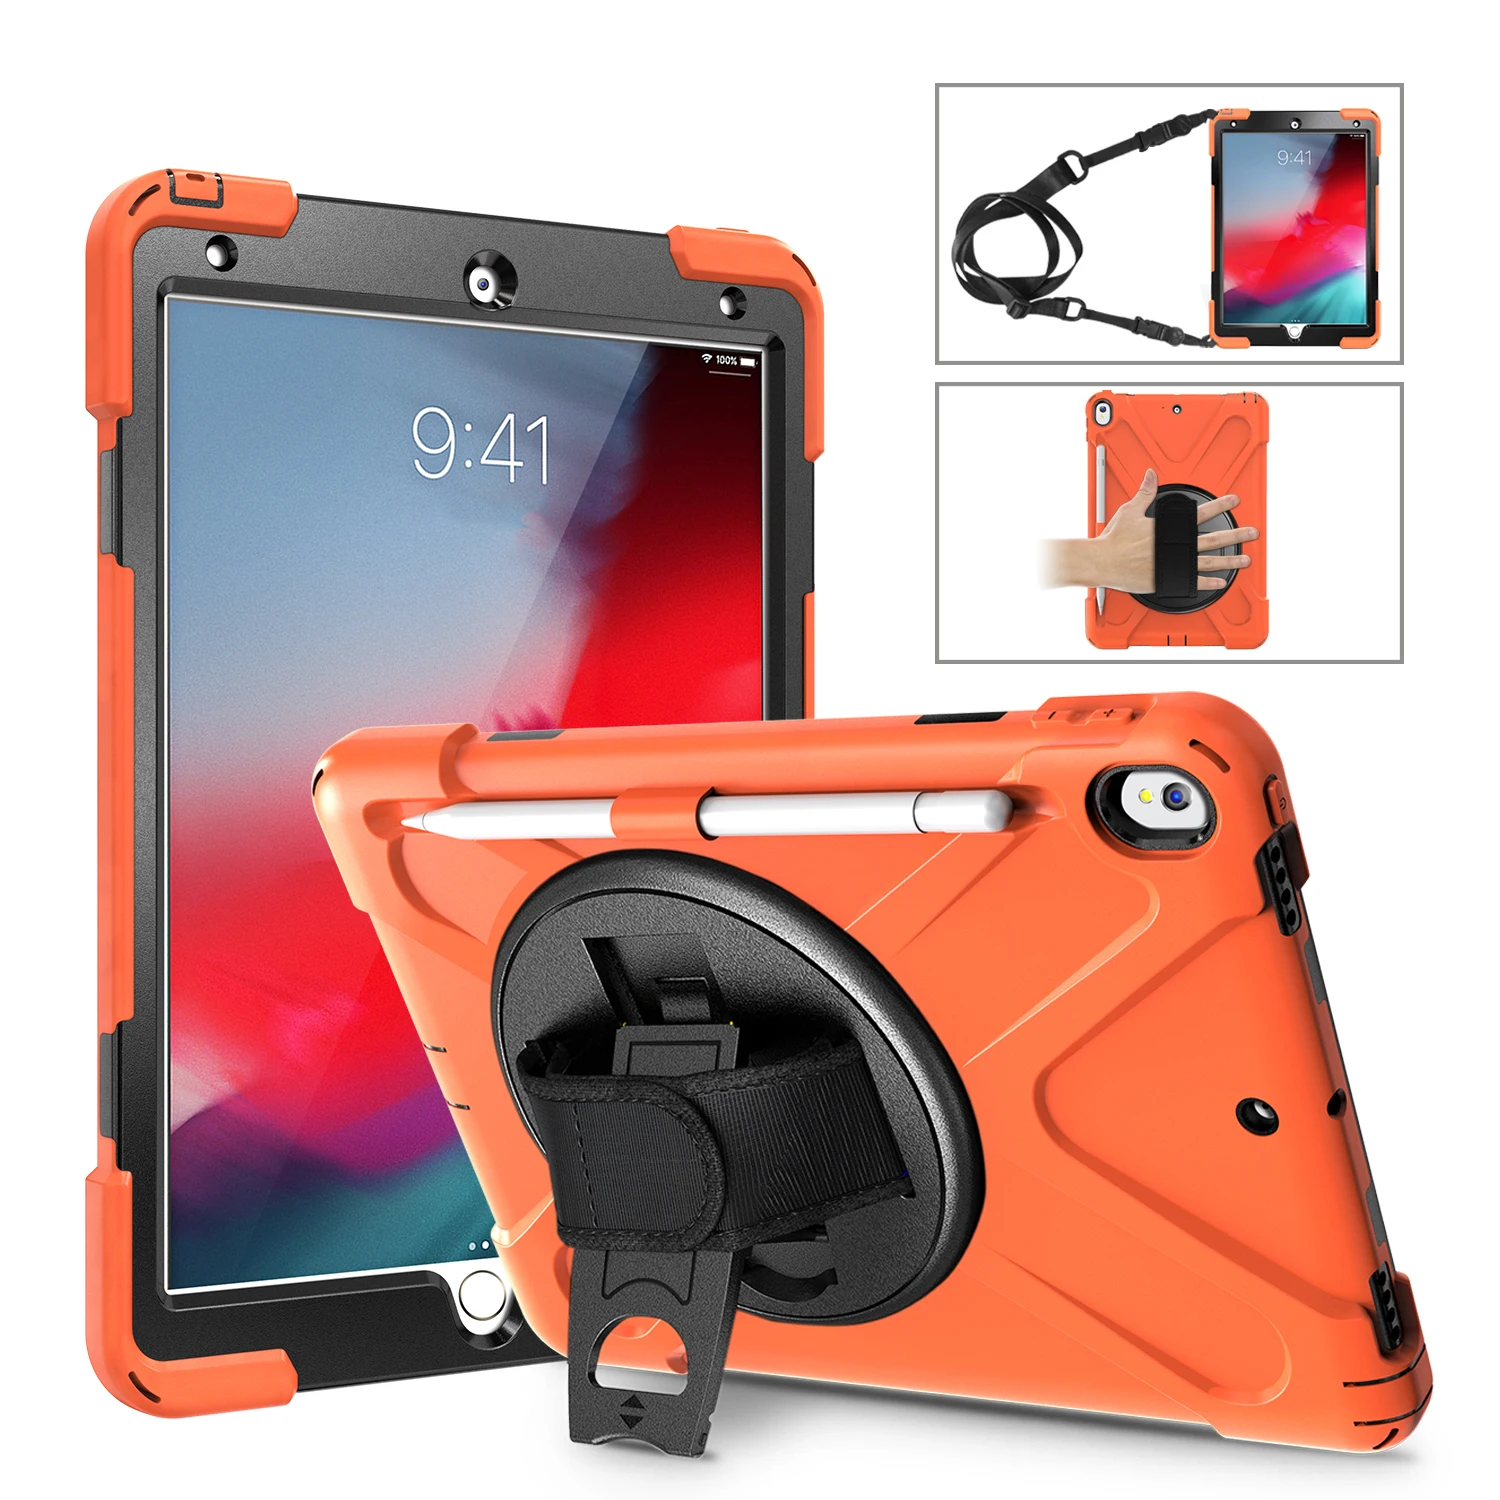 

Rugged Hybrid Armor Case for iPad Air 3 10.5 2019/Pro 10.5 2017 Kickstand Hand Shoulder Strap Shell Pencil Holder Tablet Cover